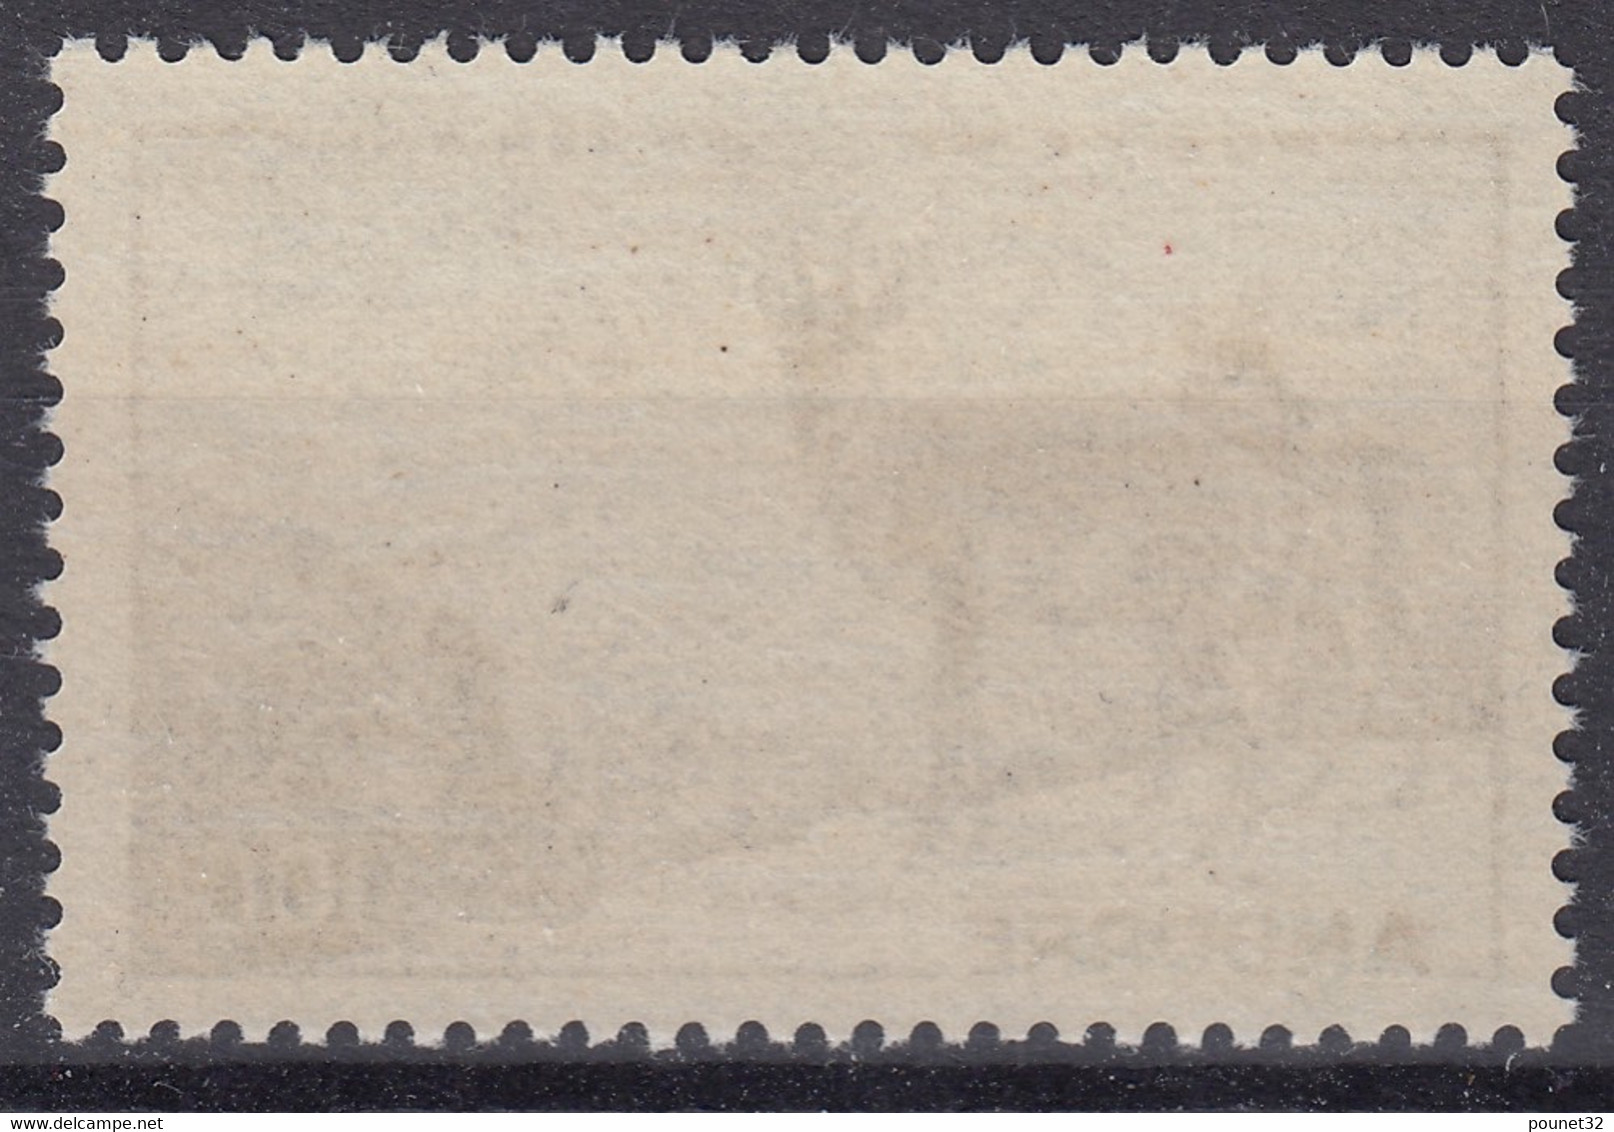 ANDORRE : POSTE AERIENNE ISARDS N° 1 NEUF ** GOMME SANS CHARNIERE - COTE 110 € - Airmail